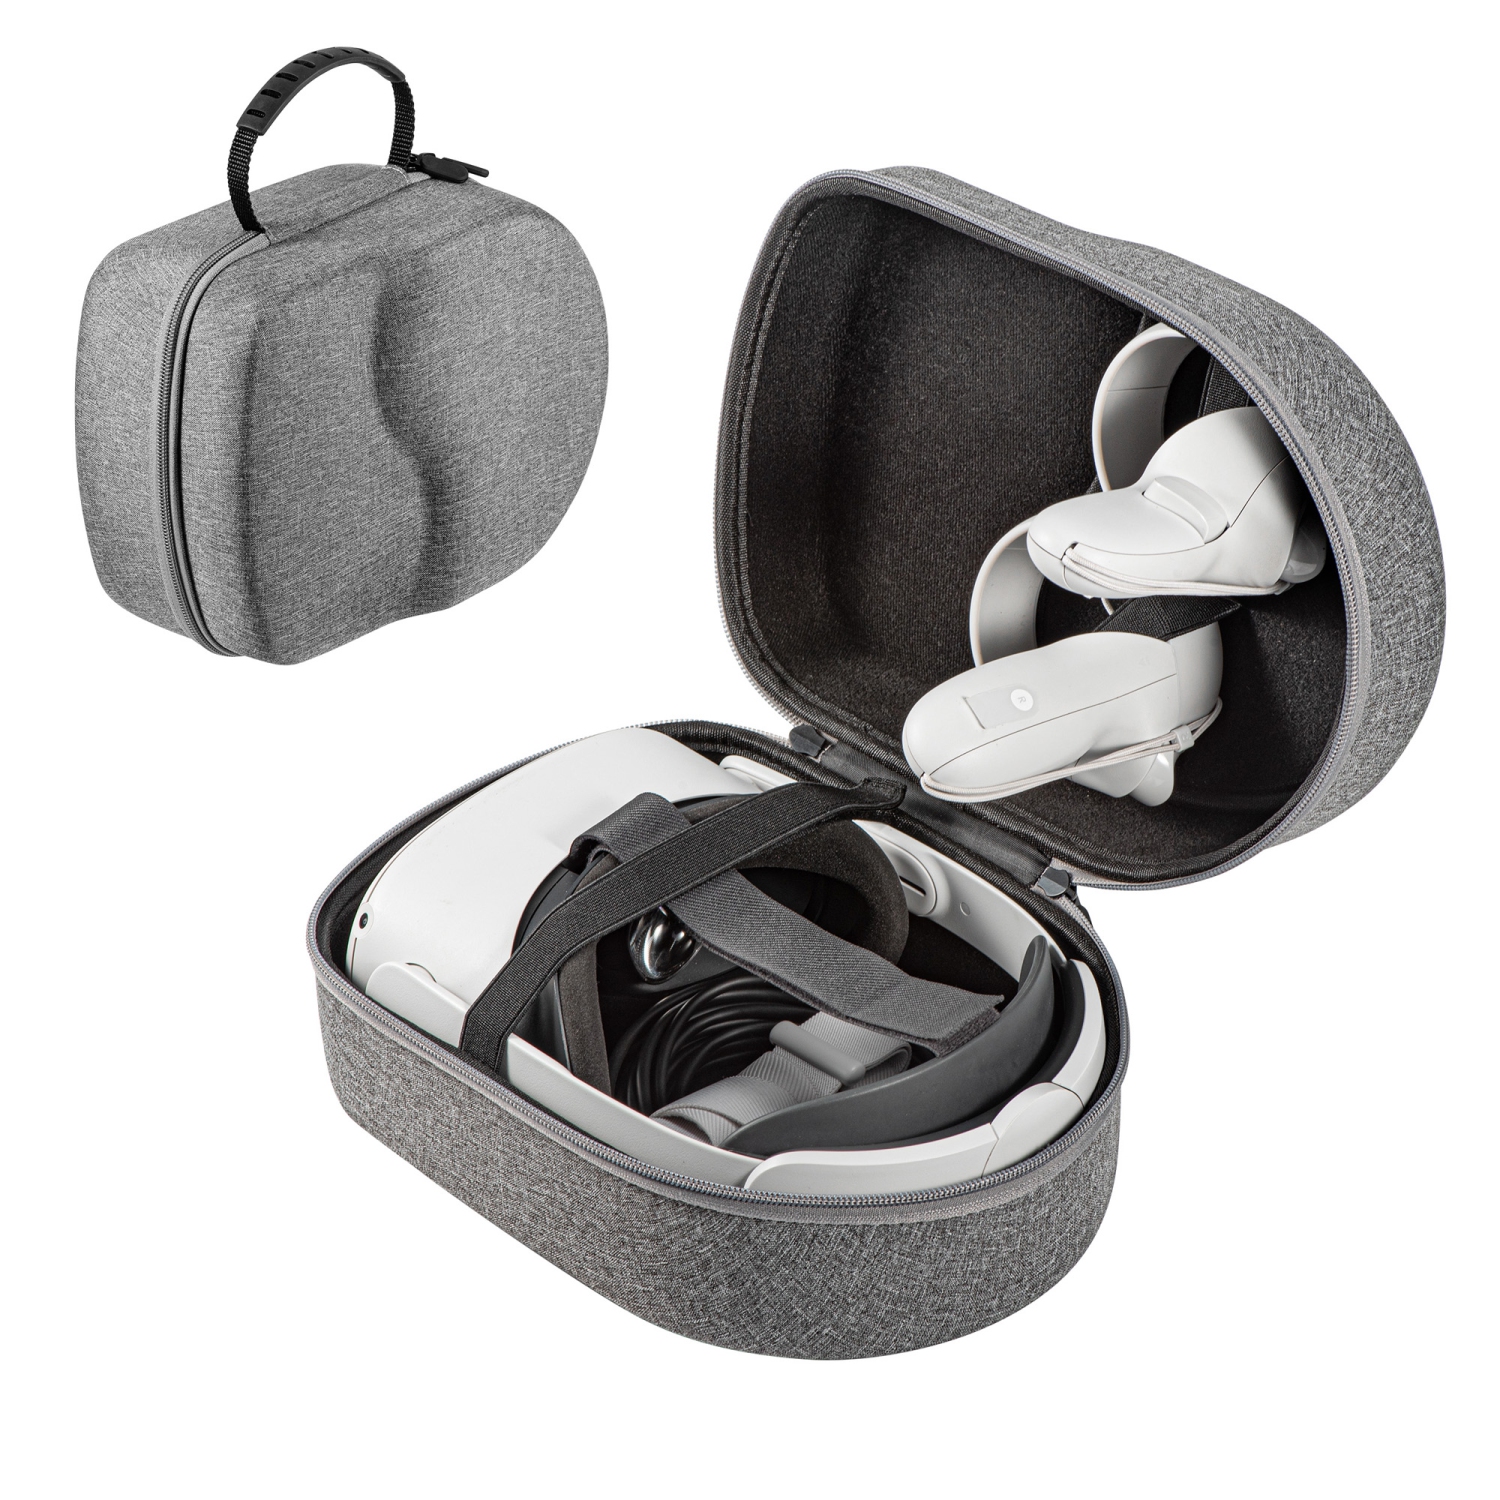 Hard Carrying Case Compatible with Oculus/Meta Quest 2 VR Headset, Elite Strap, Touch Controllers and Other Accessories